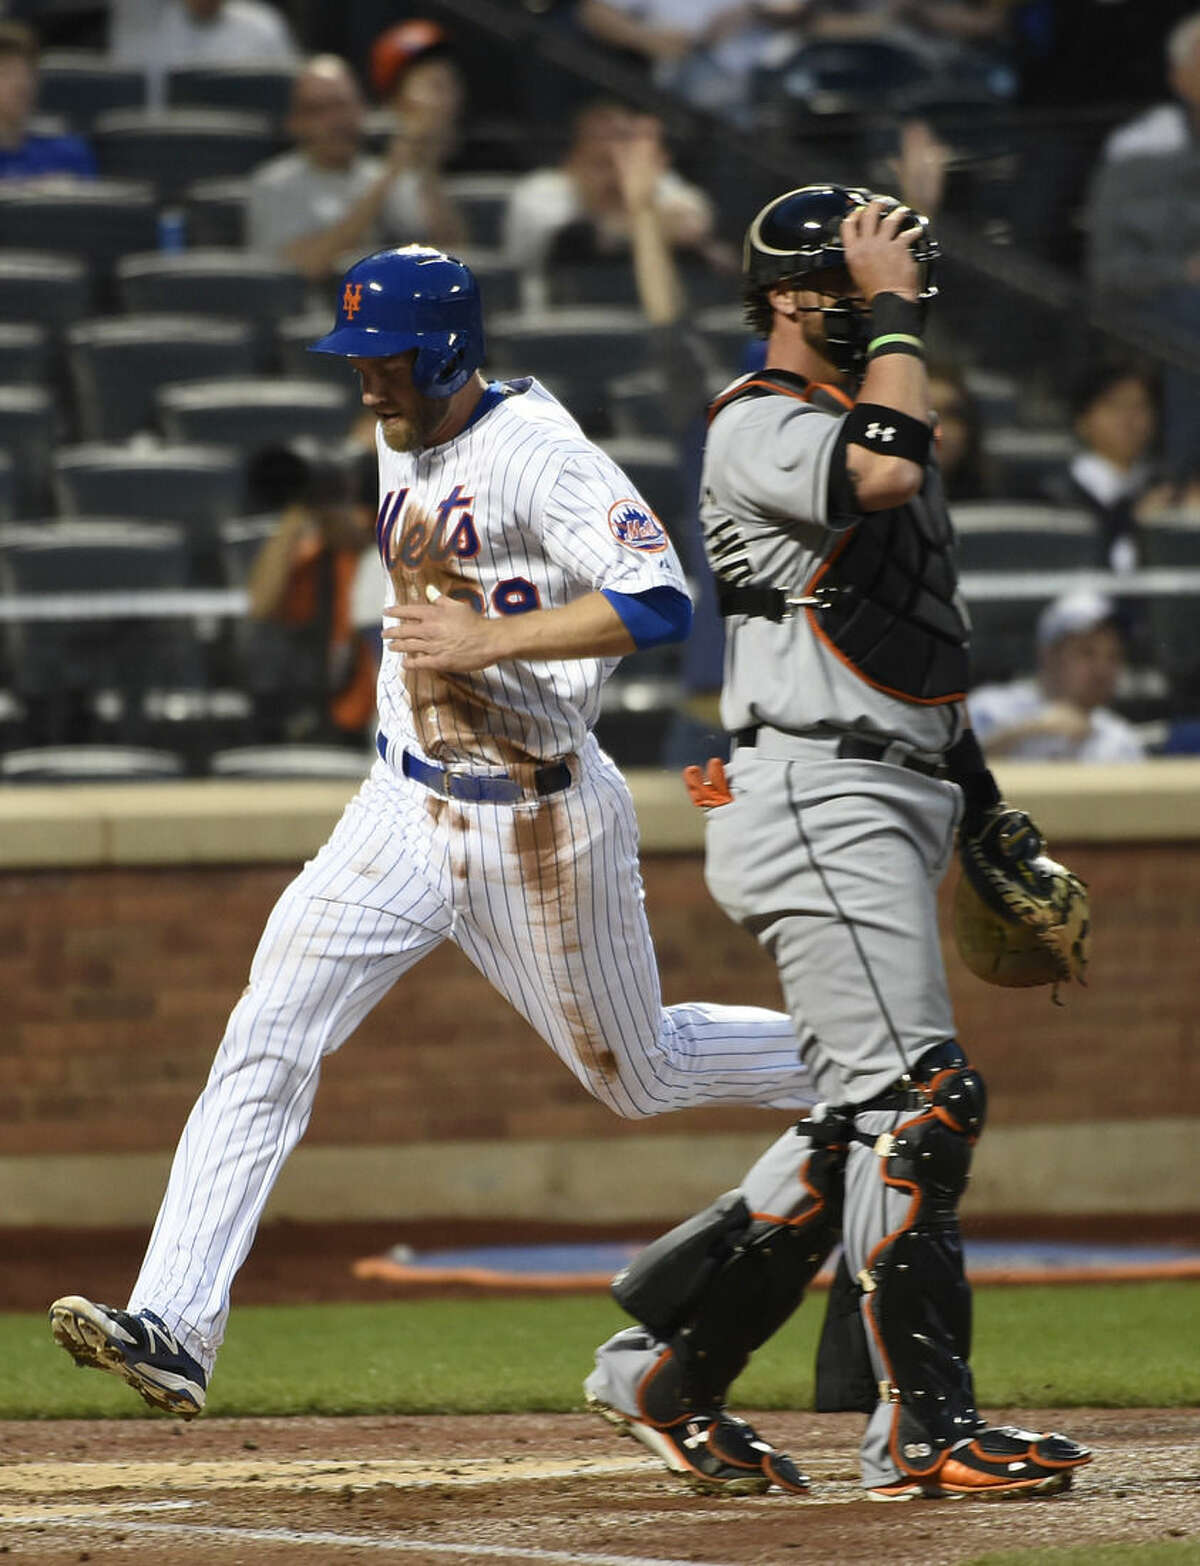 New York Mets' Eric Campbell, left, scores at home plate behind Miami Marlins catcher Jarrod Saltalamacchia on an RBI-single by Juan Lagares in the second inning of a baseball game at Citi Field on Saturday, April 18, 2015, in New York. (AP Photo/Kathy Kmonicek)